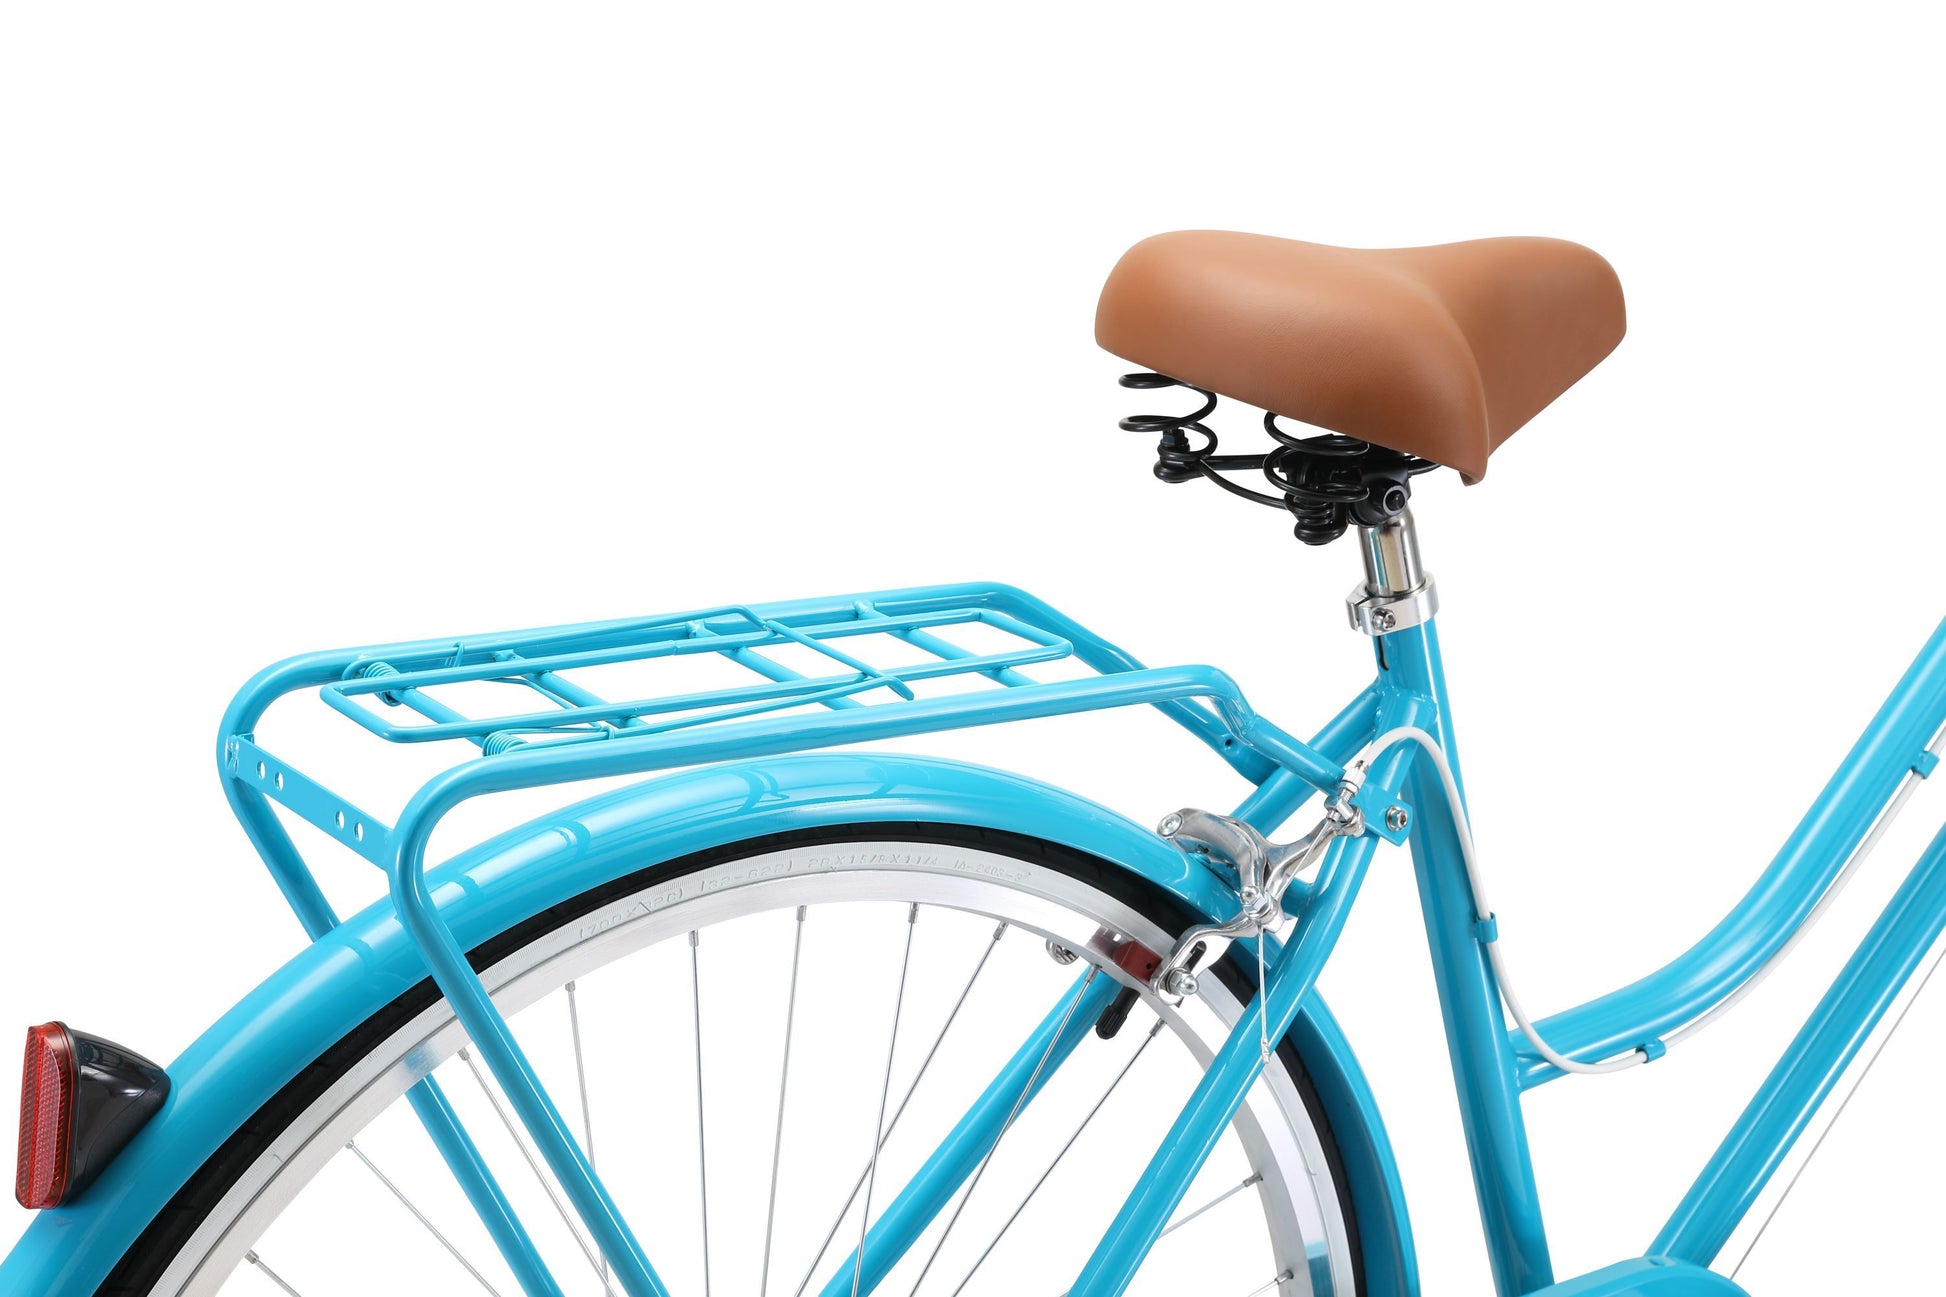 Ladies Classic Plus Vintage Bike in aqua showing rear pannier rack and comfortable saddle from Reid Cycles Australia